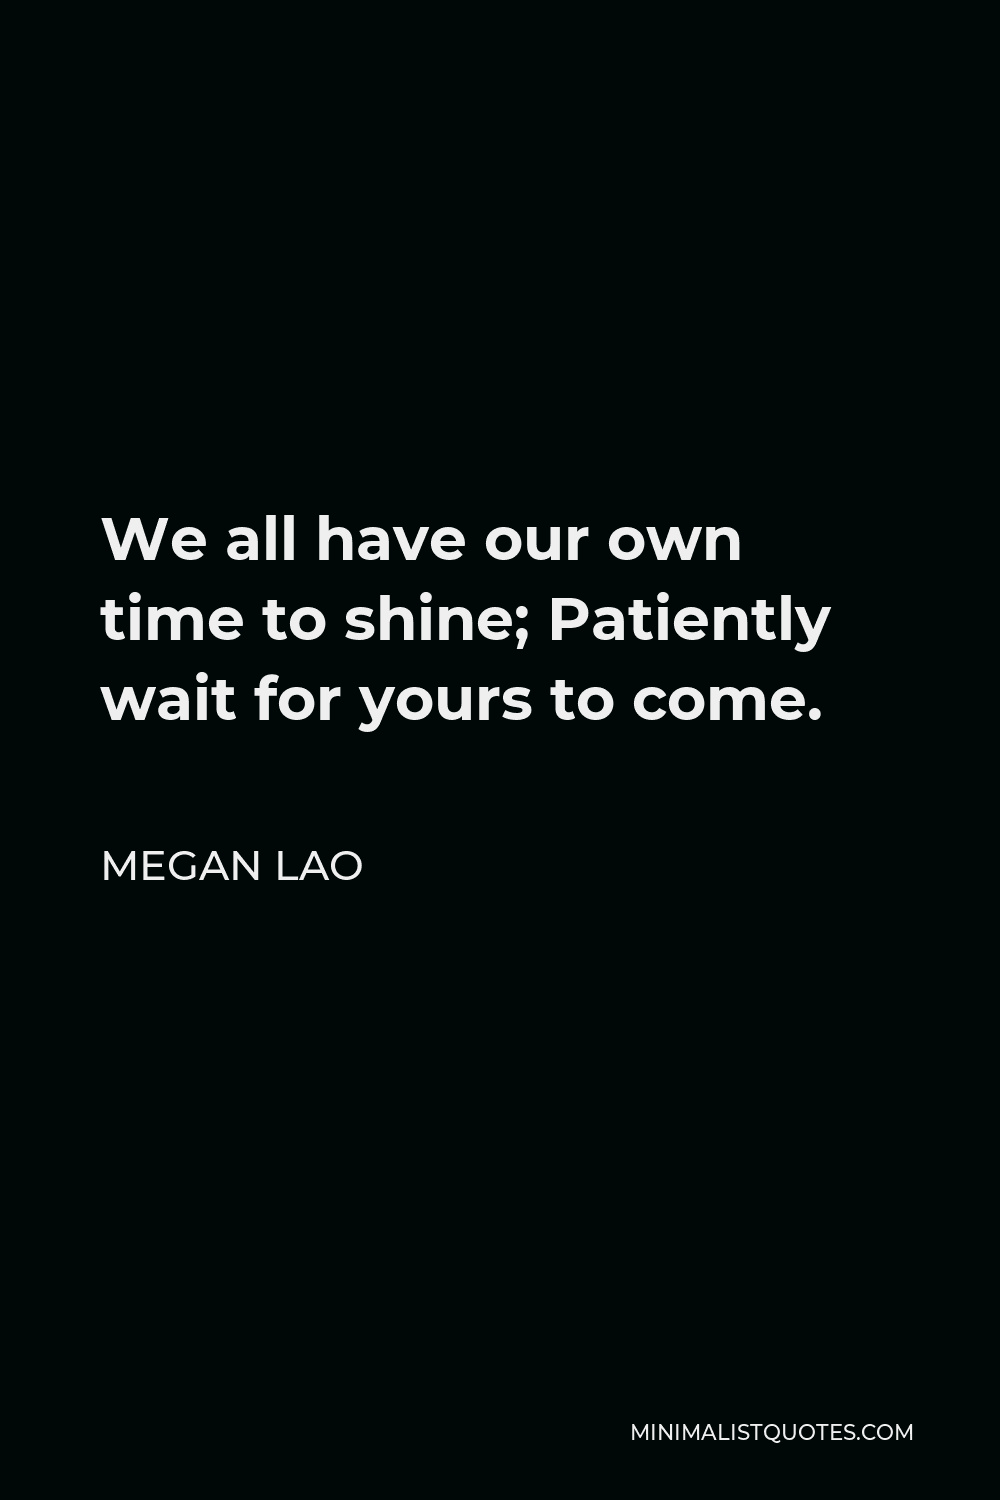 Megan Lao Quote - We all have our own time to shine; Patiently wait for yours to come.